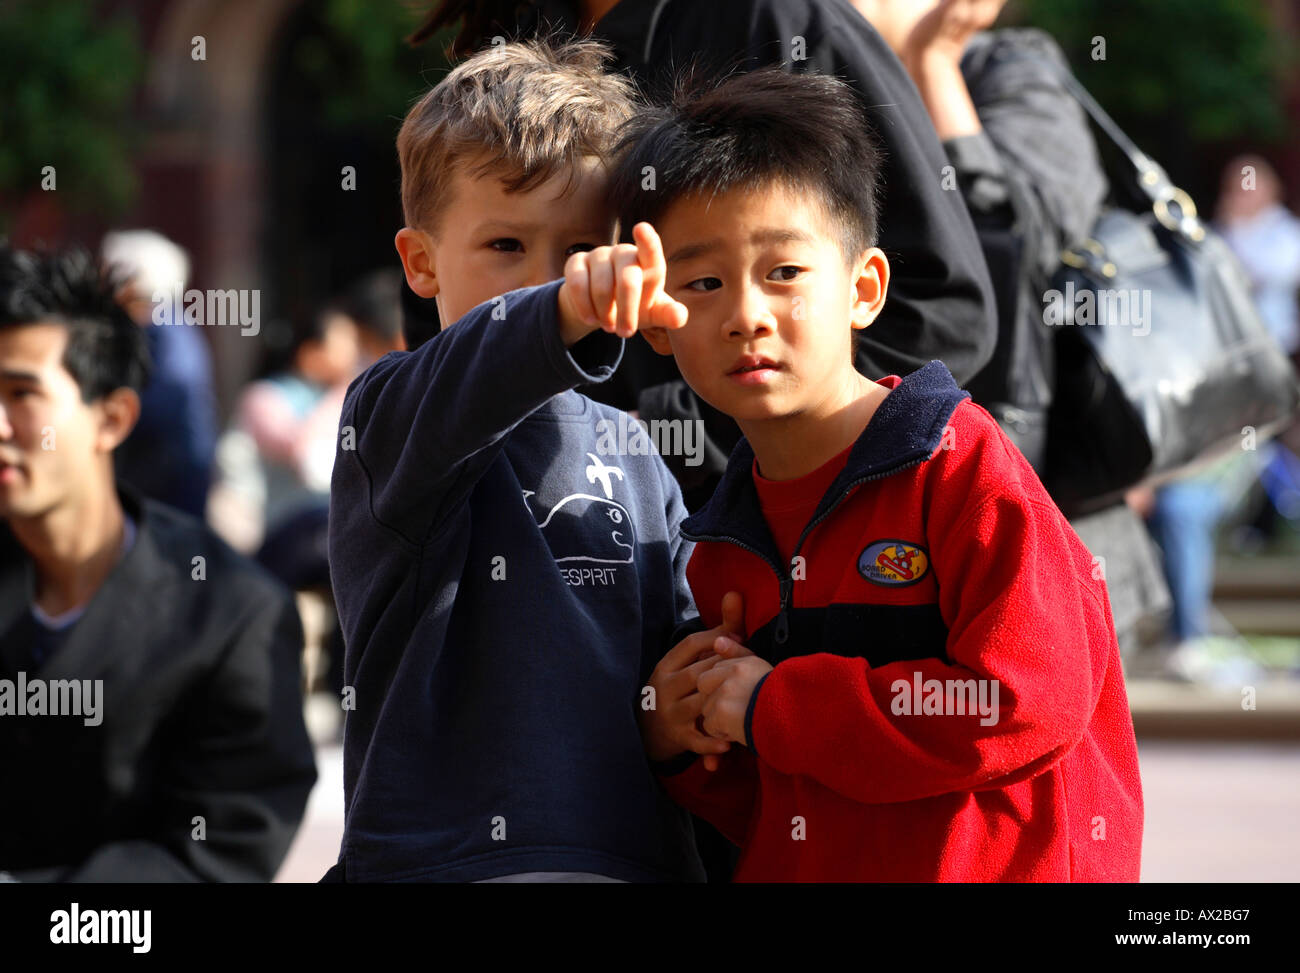 Two young boys - interracial best friends - one white, one Chinese holding hands in the audience at the Mid-Autumn Festival, V&A Museum, October 2006 Stock Photo